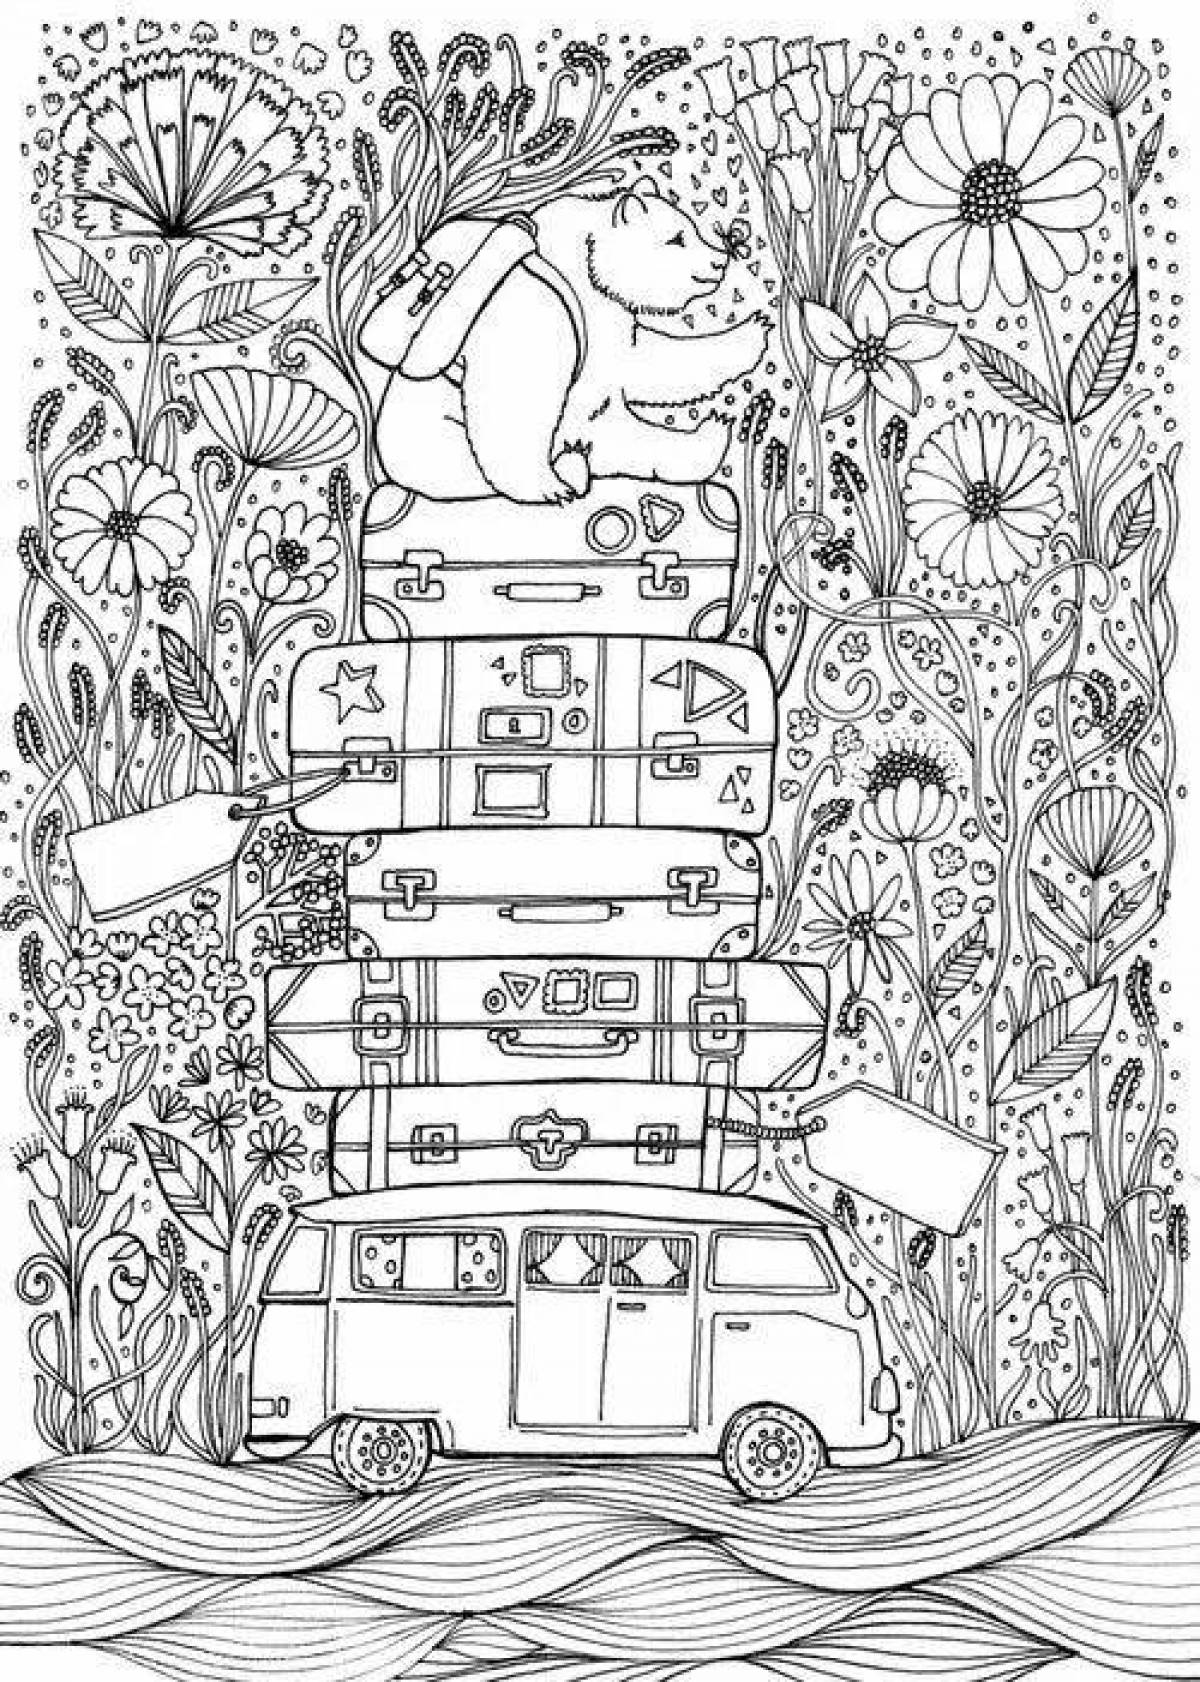 Coloring book serene journey